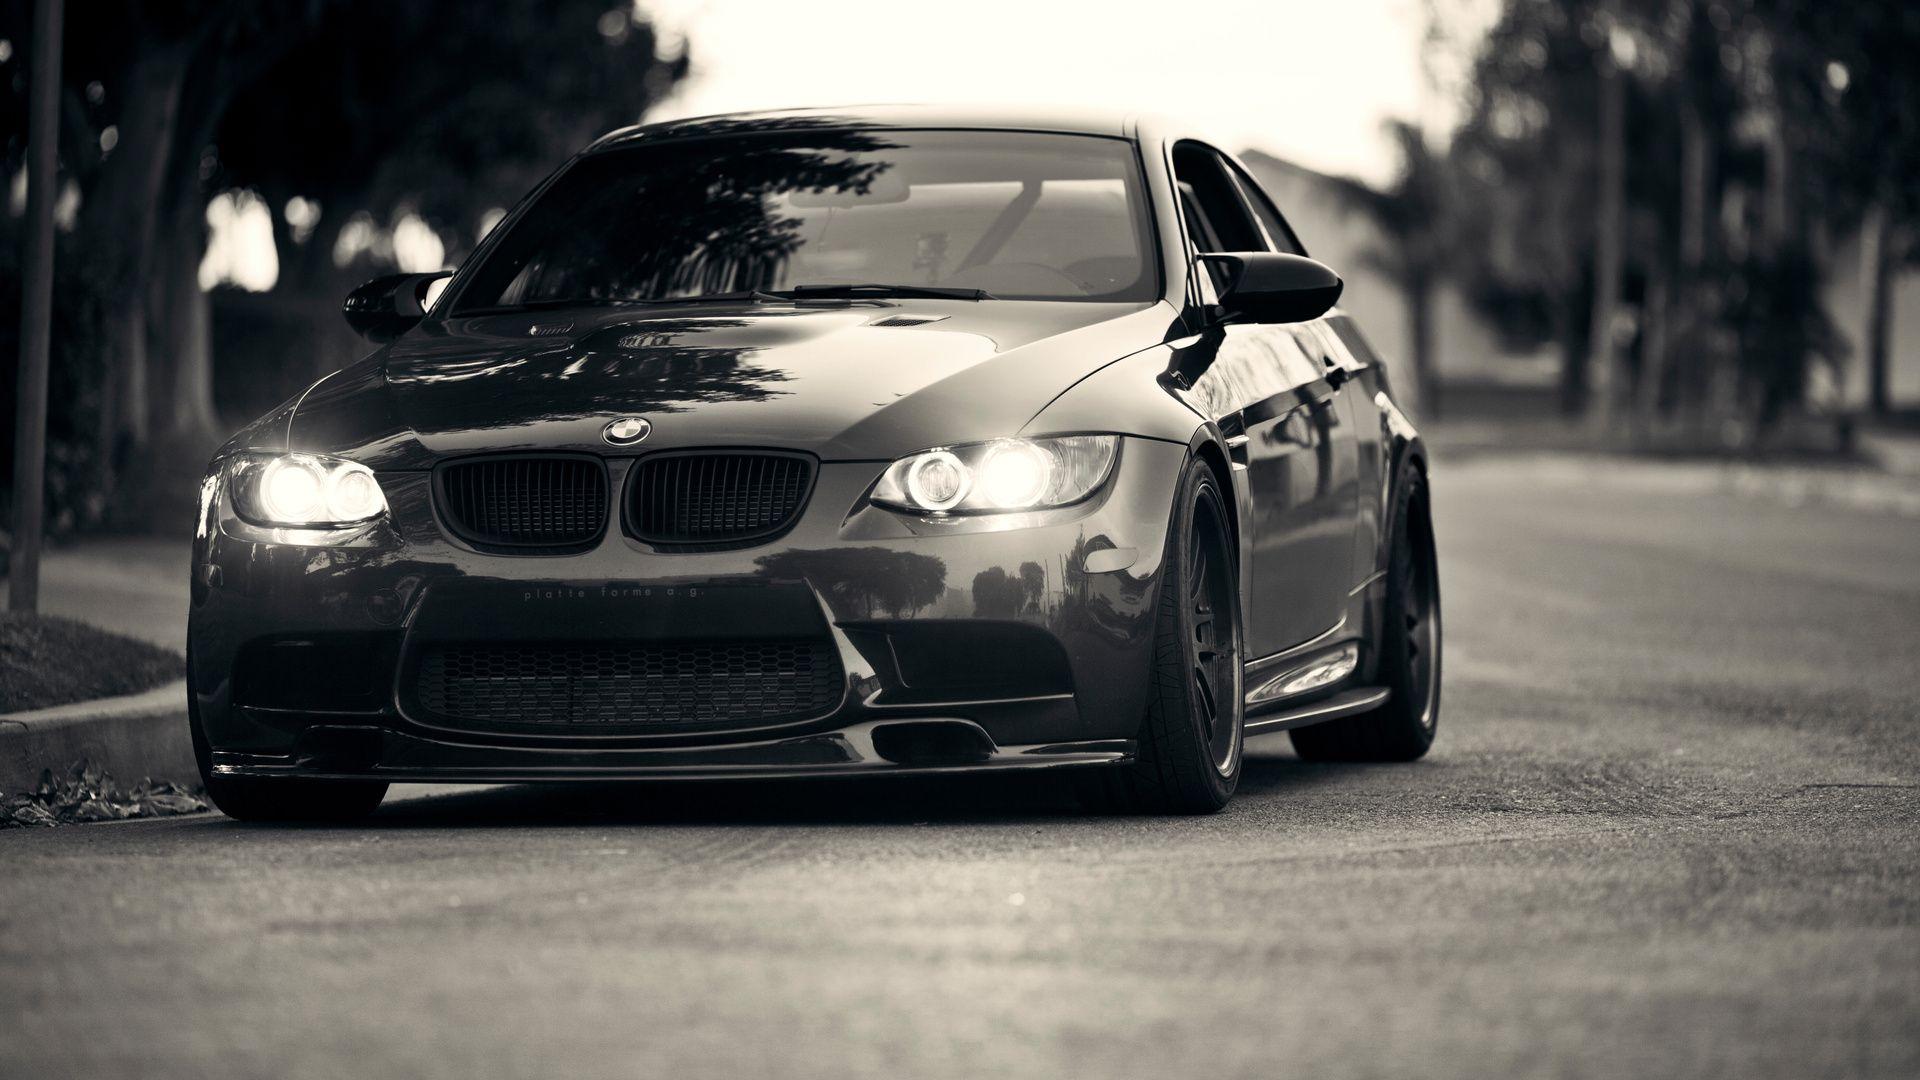 M Bmw, Lights Wallpaper and Picture, Photo, Posters 22224